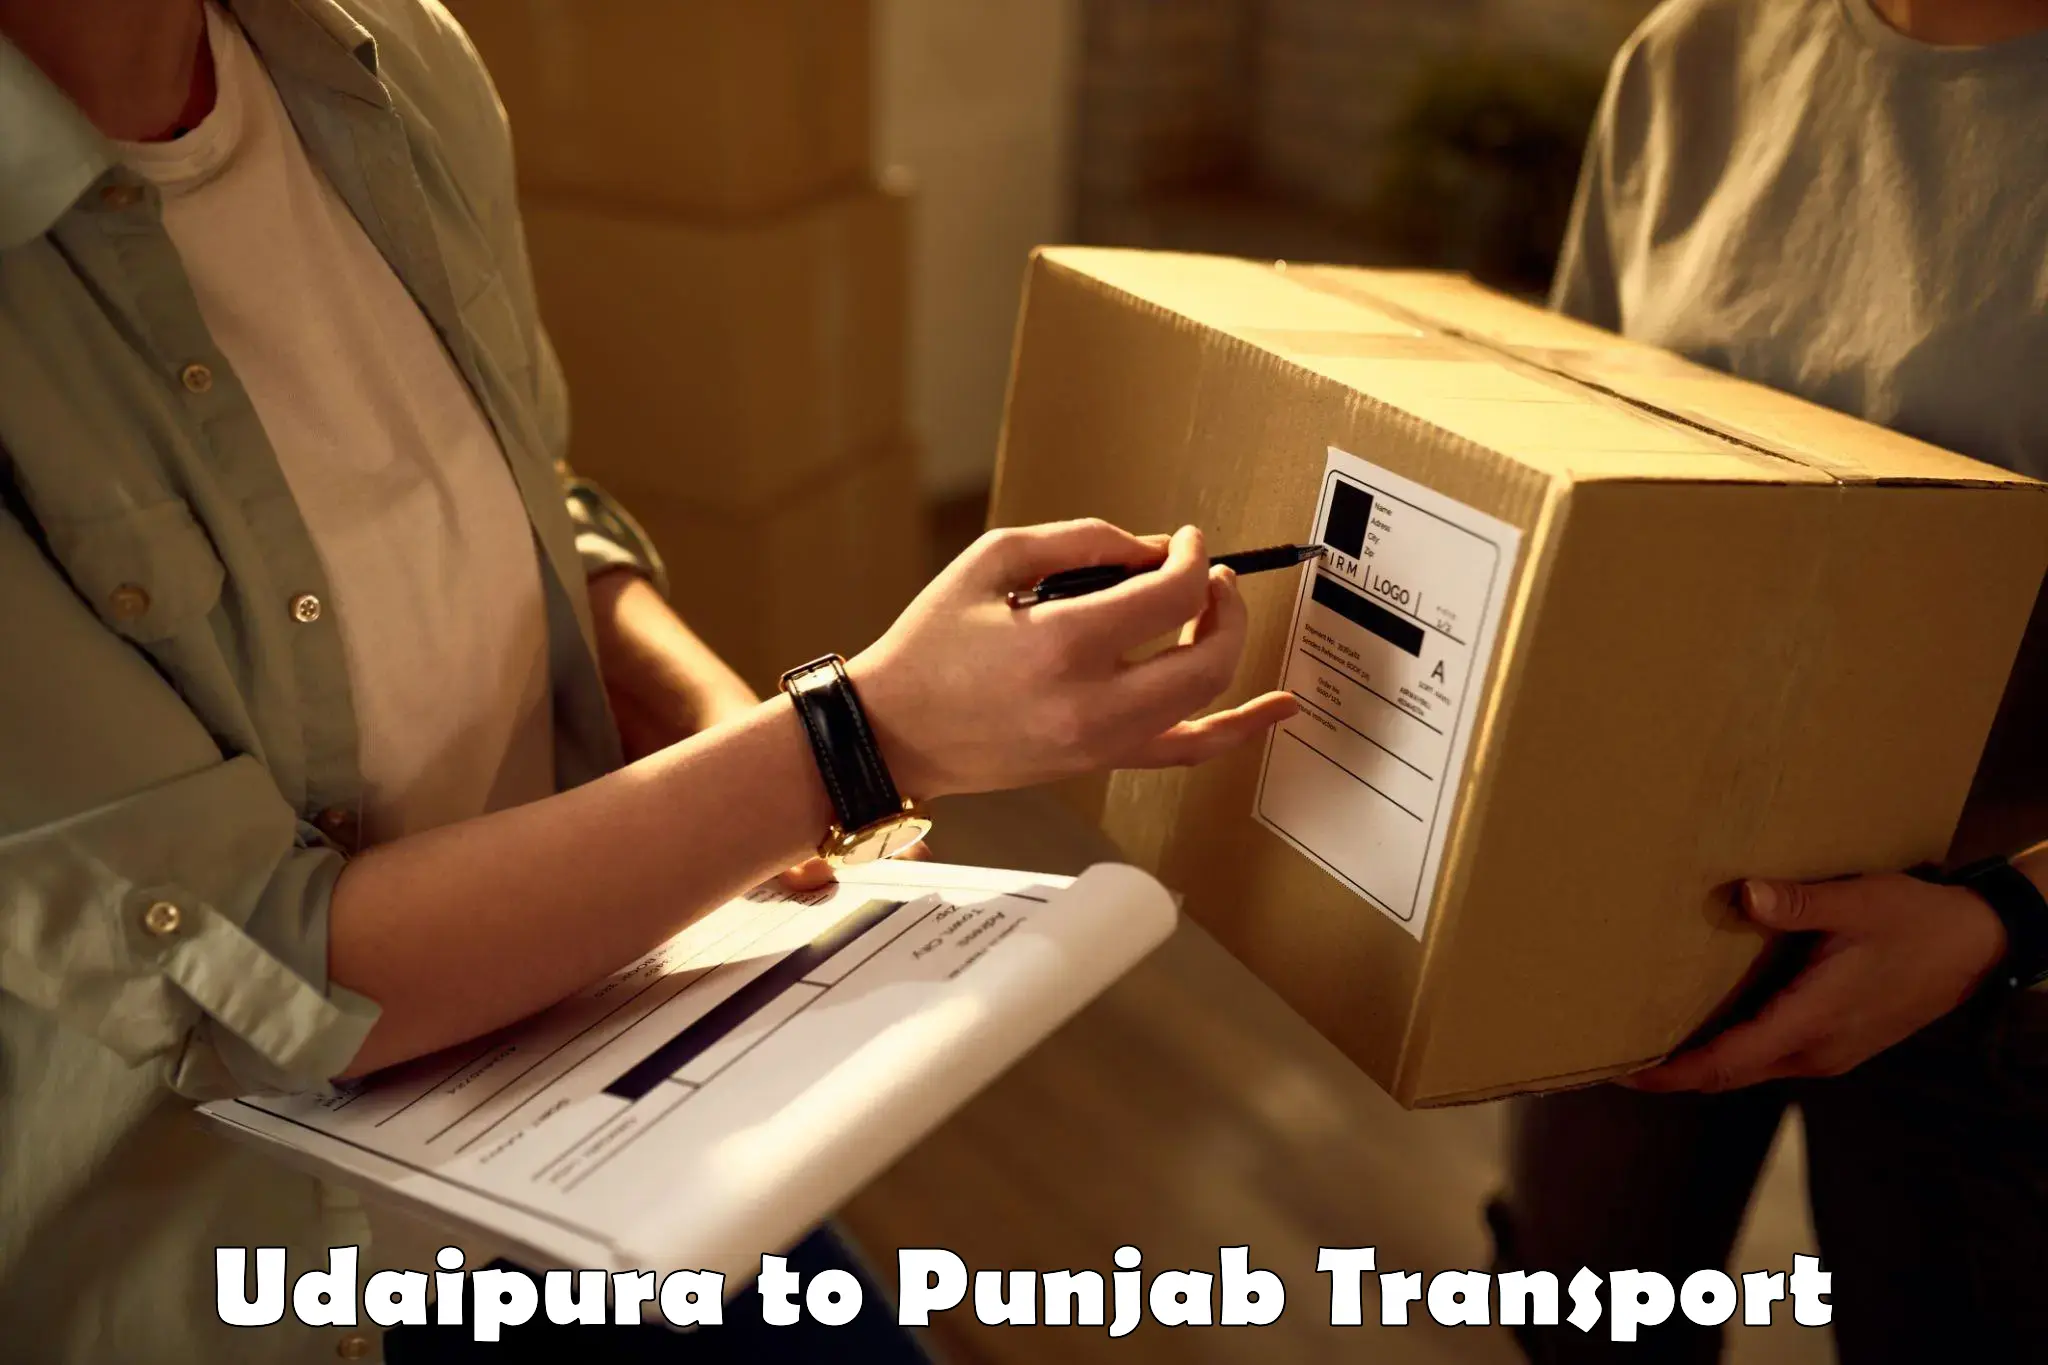 Container transport service Udaipura to Patiala